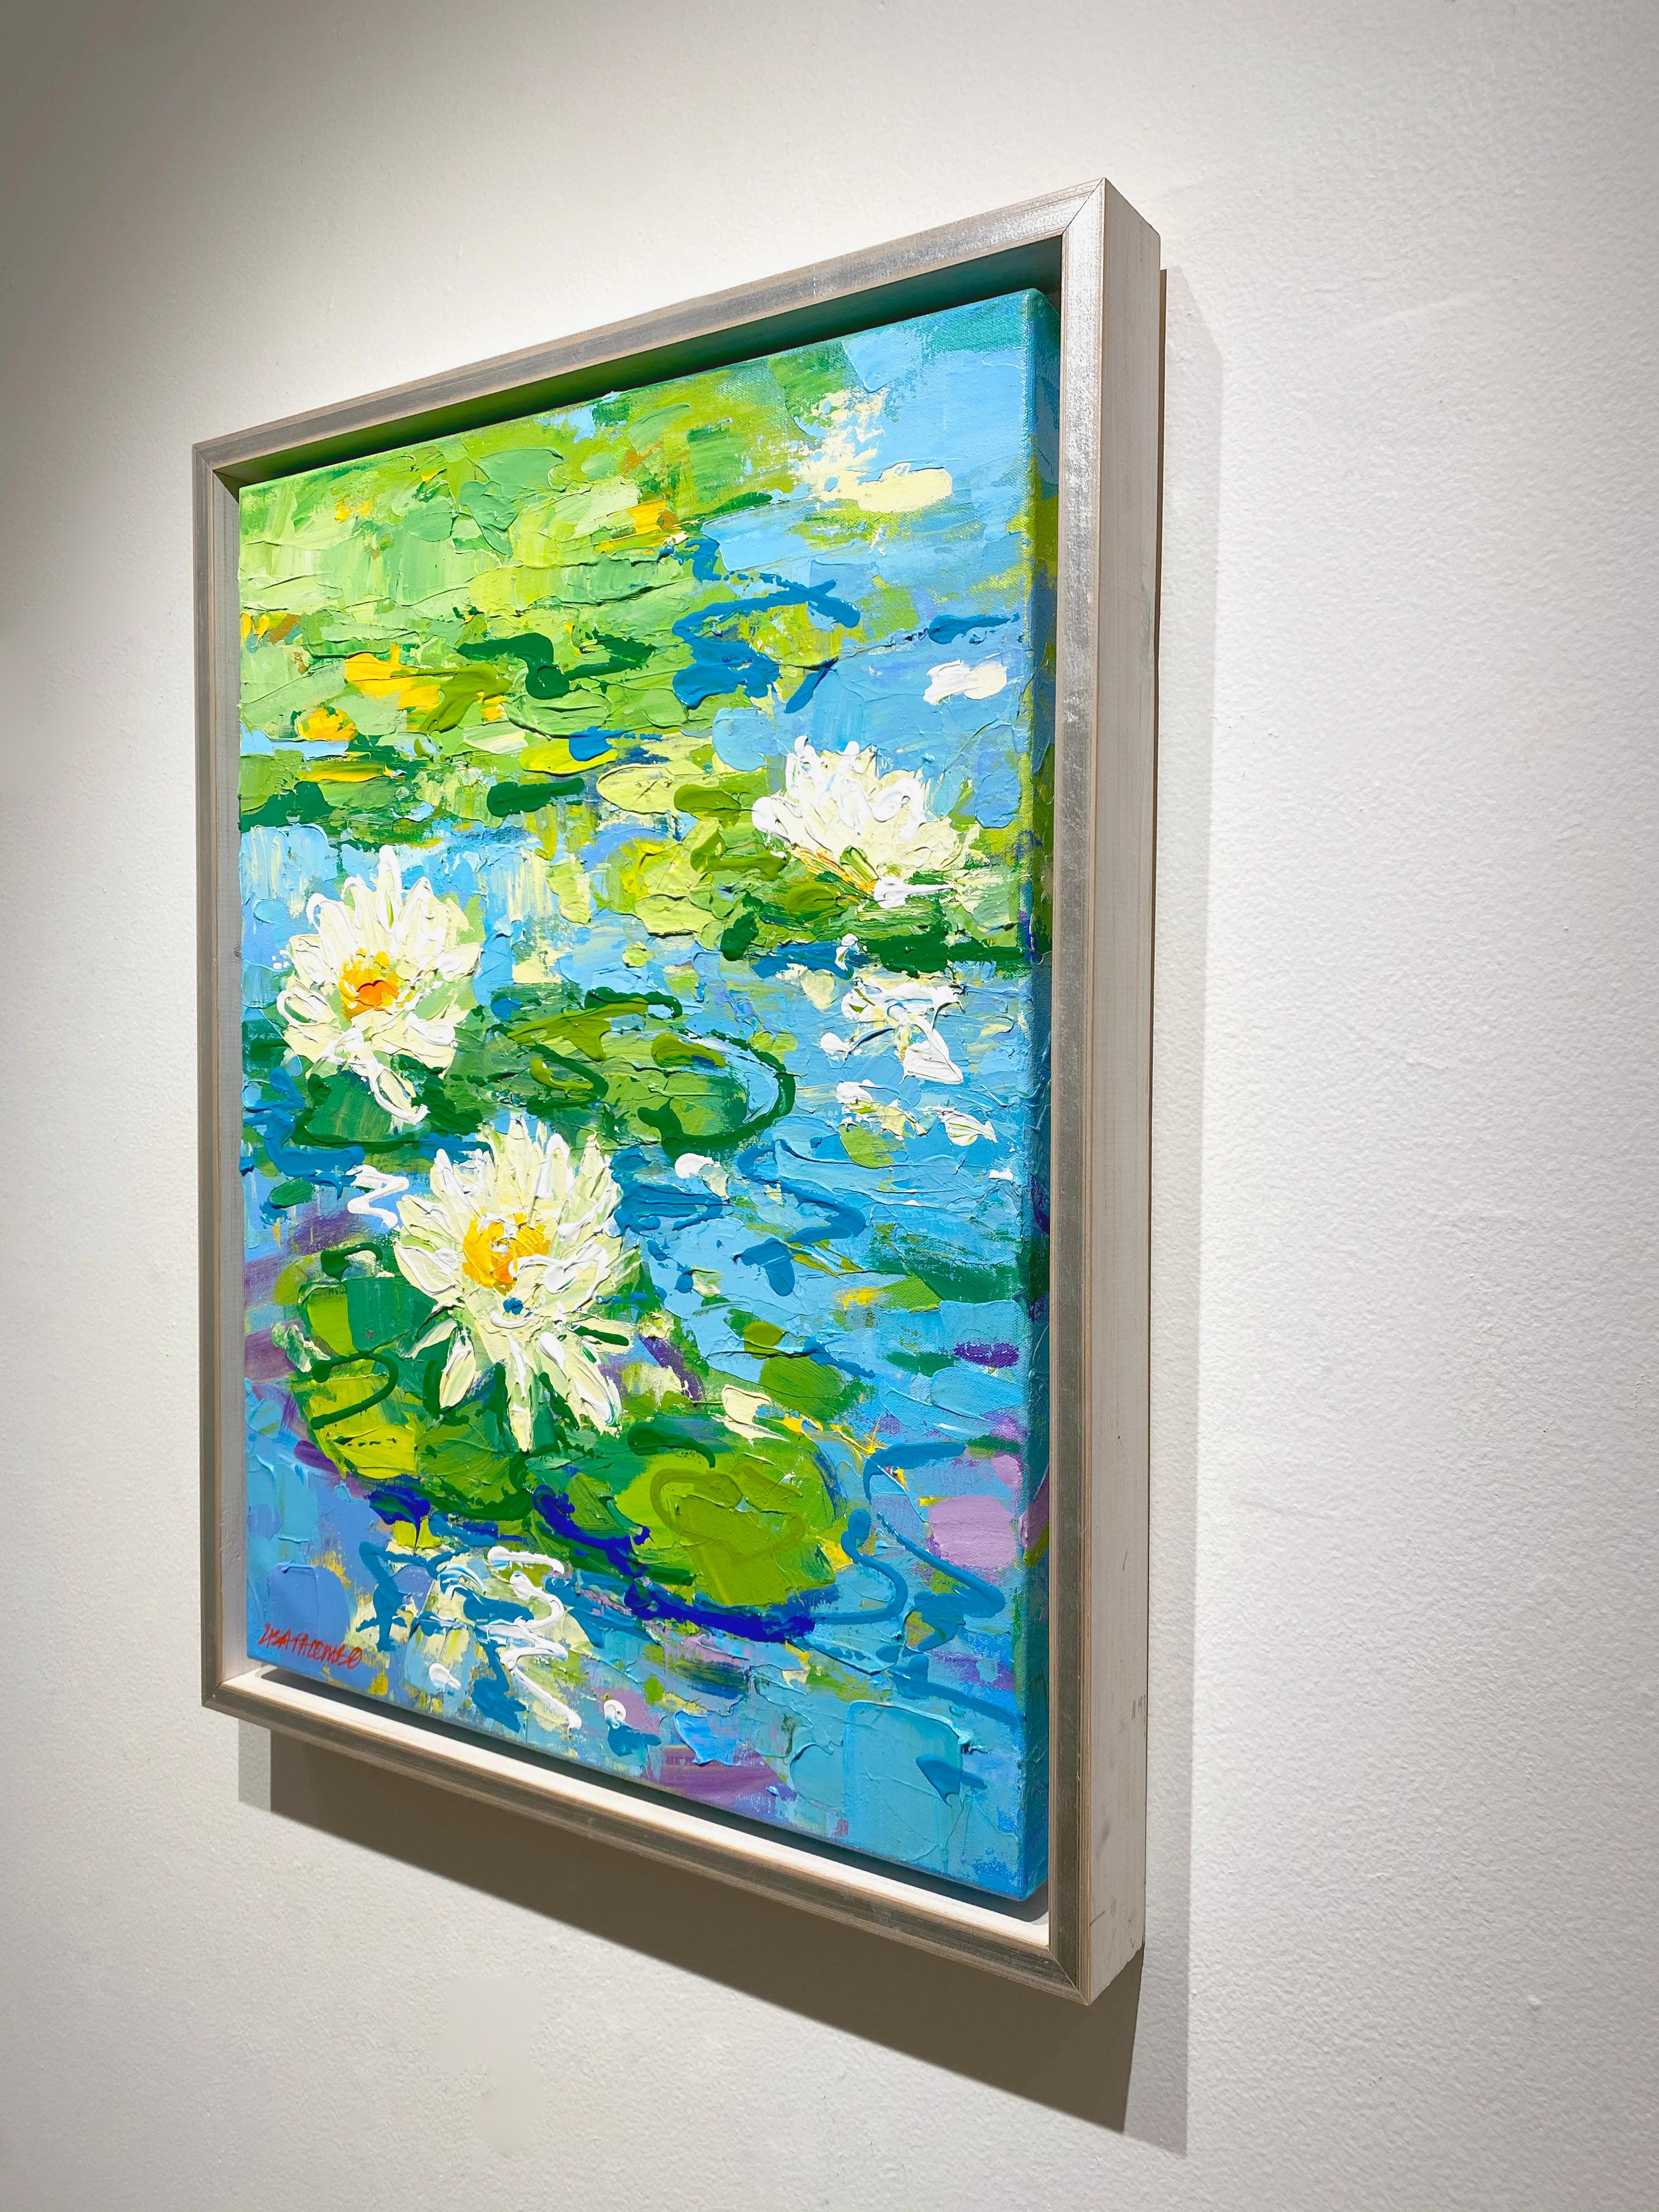 an impressionist painting of a pond full of waterlilies is unmistakably the work of